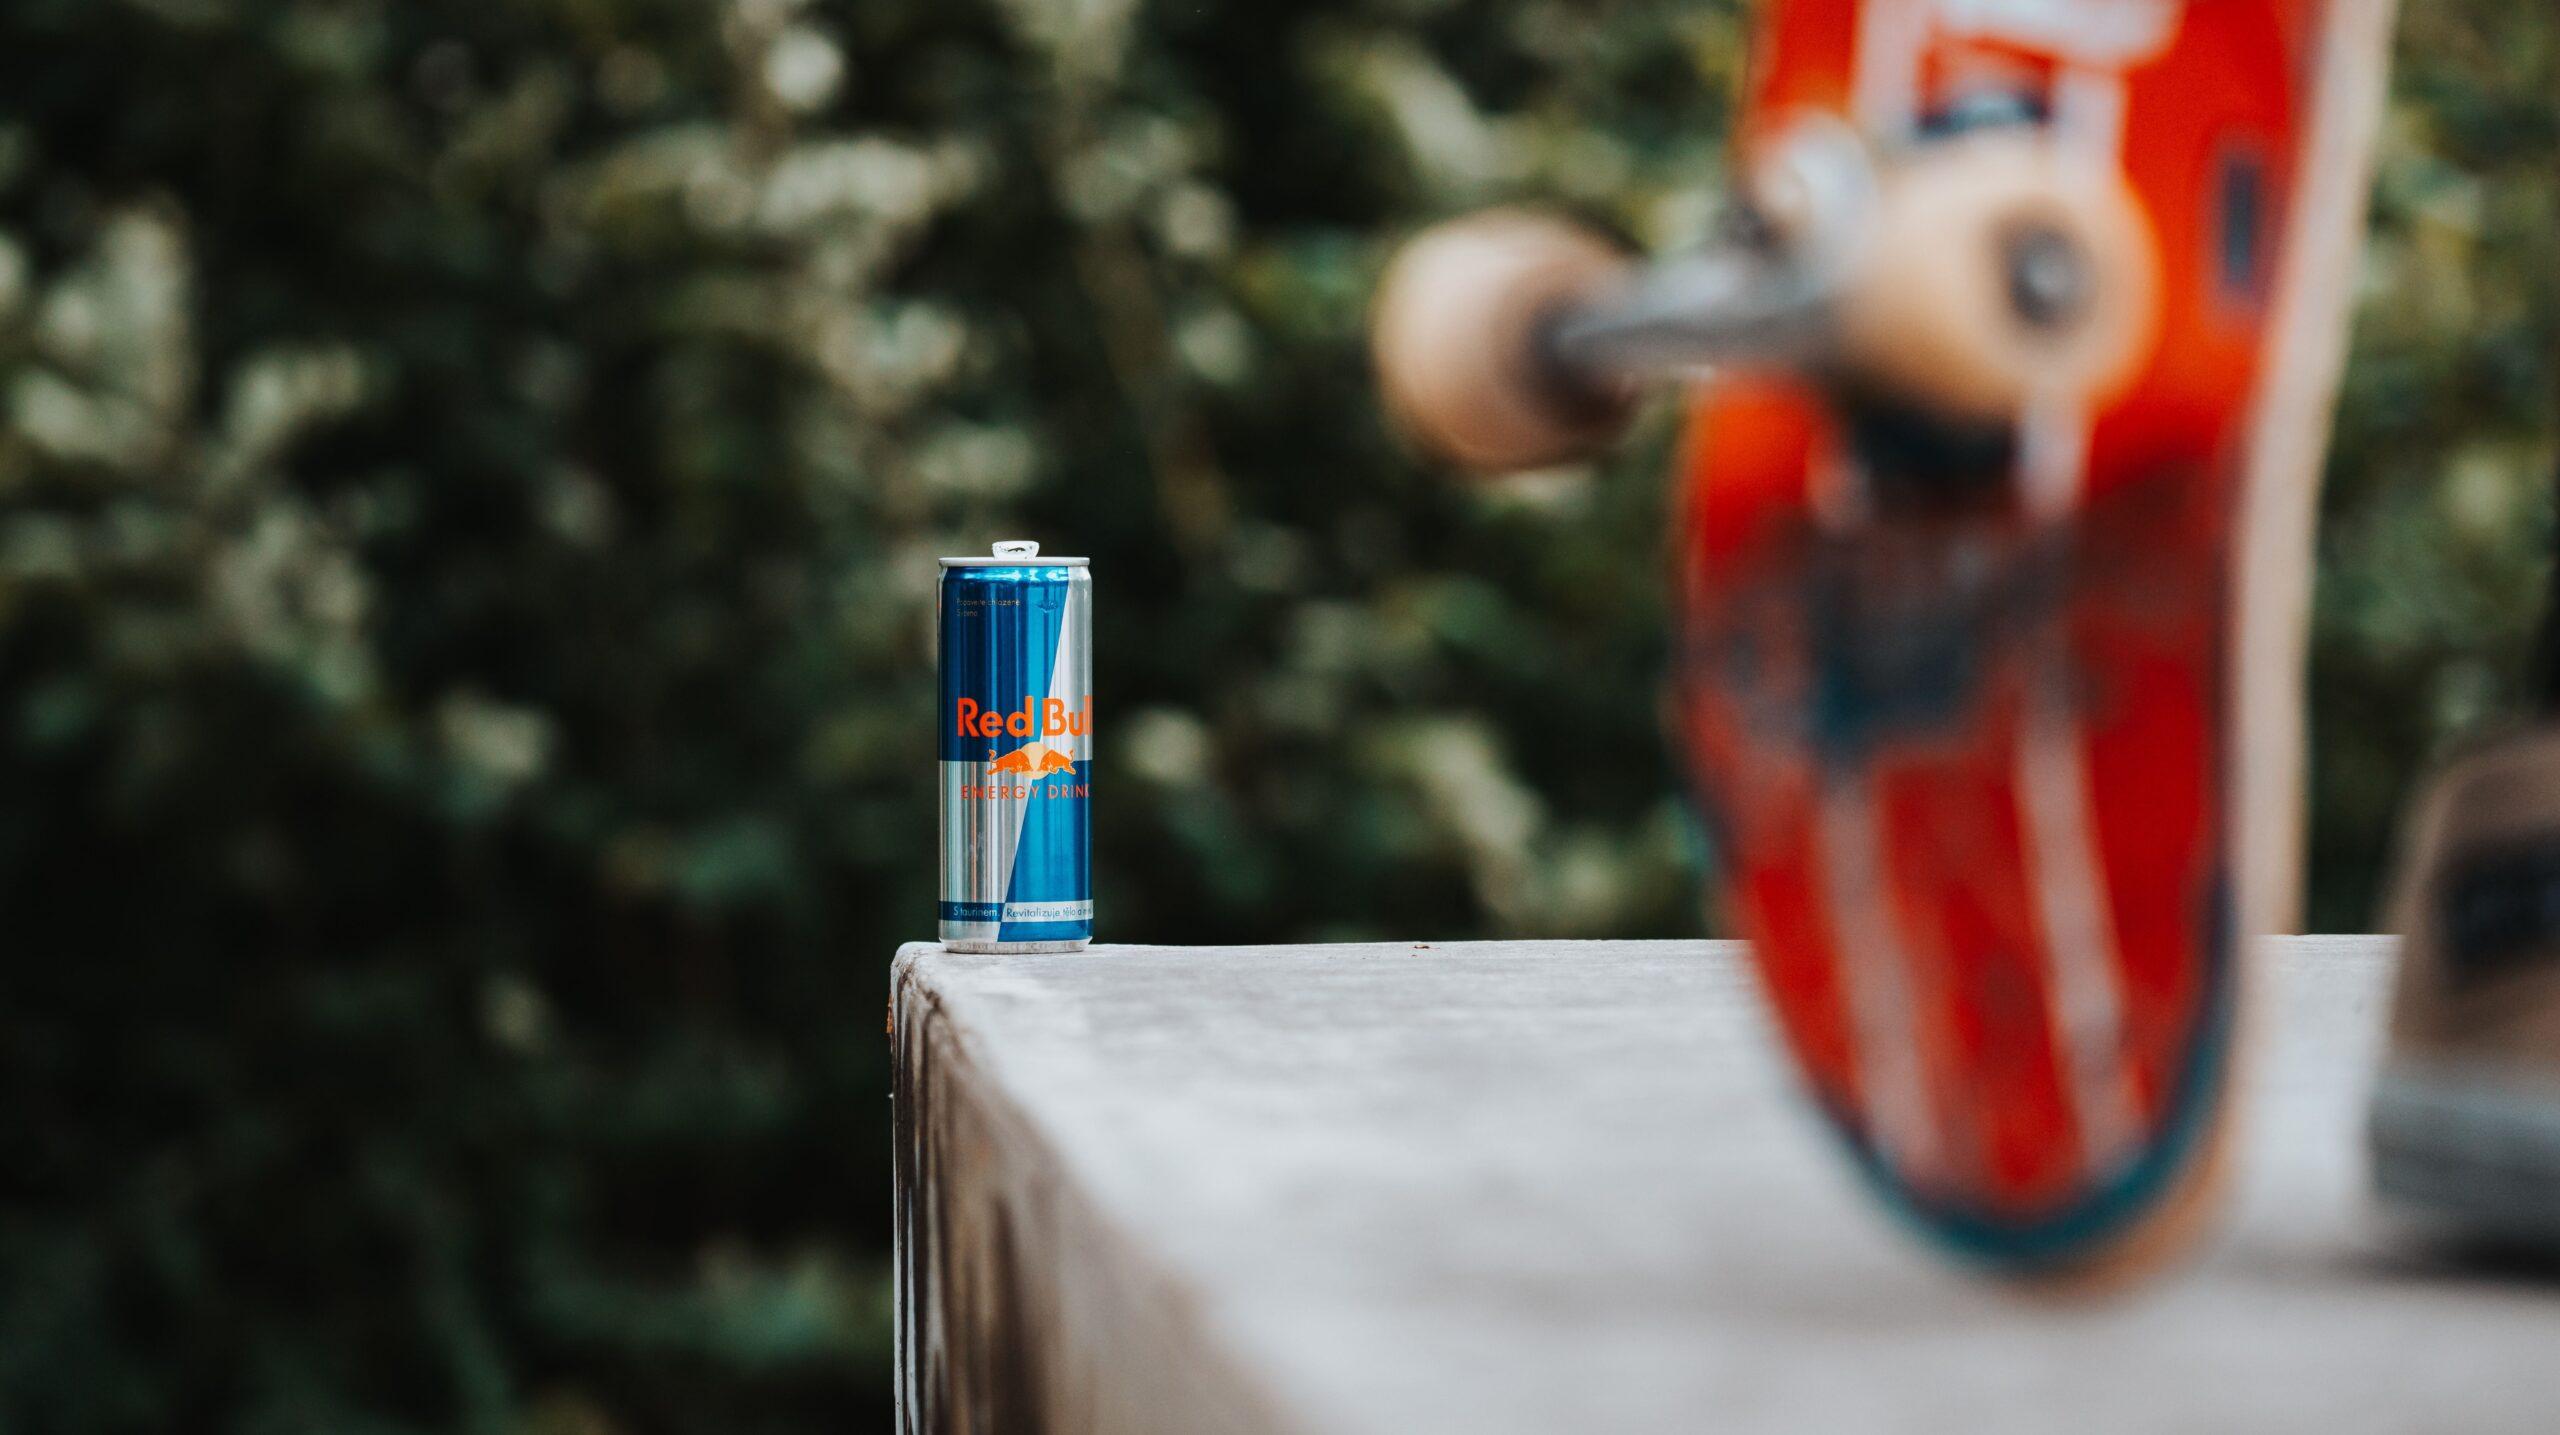 A Red Bull can on a ledge next to a skateboard.